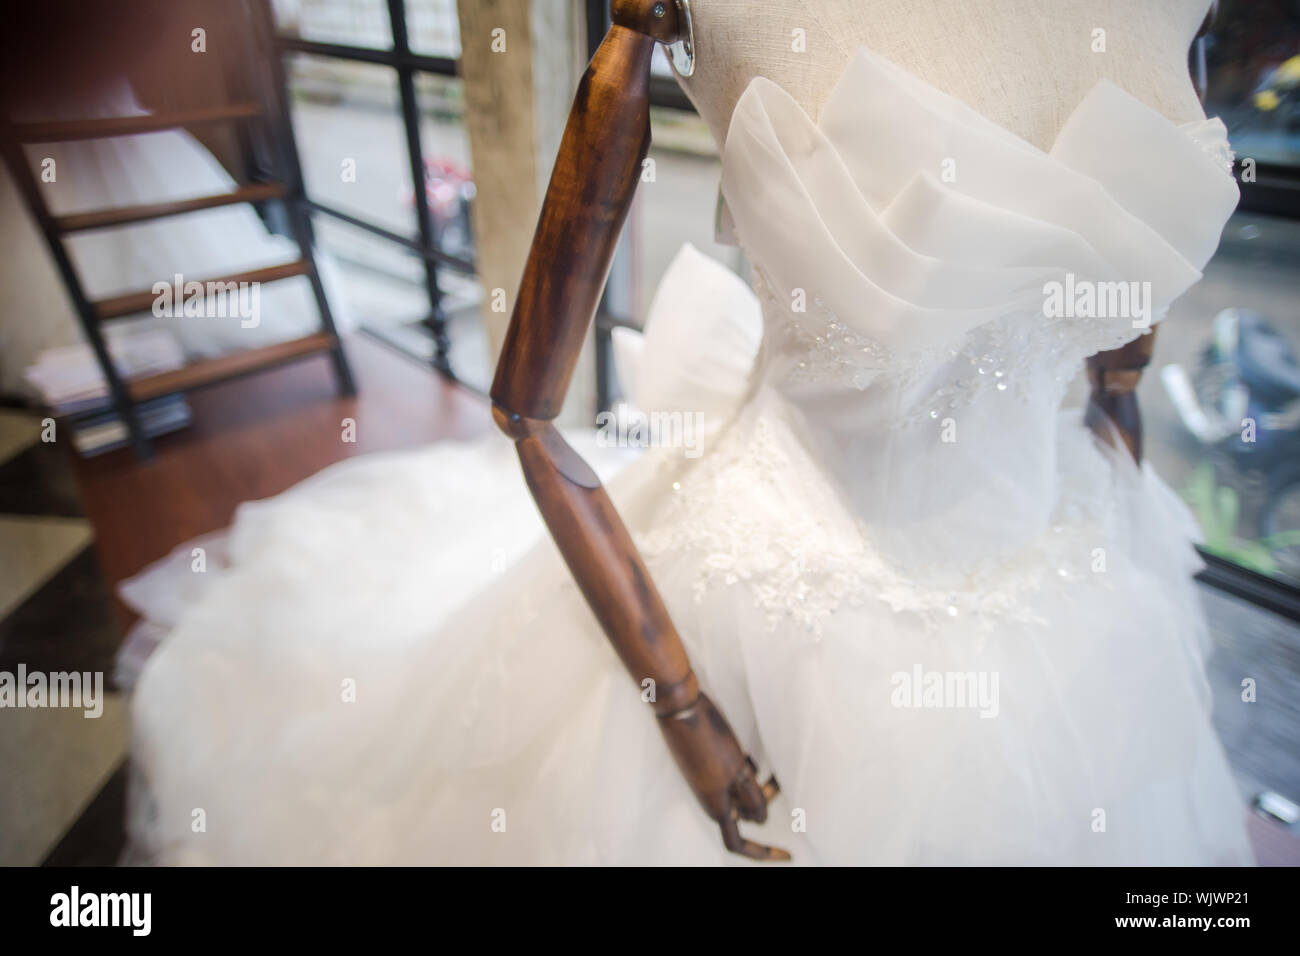 Close-up Of White Dress In Display At Shop For Sale Stock Photo